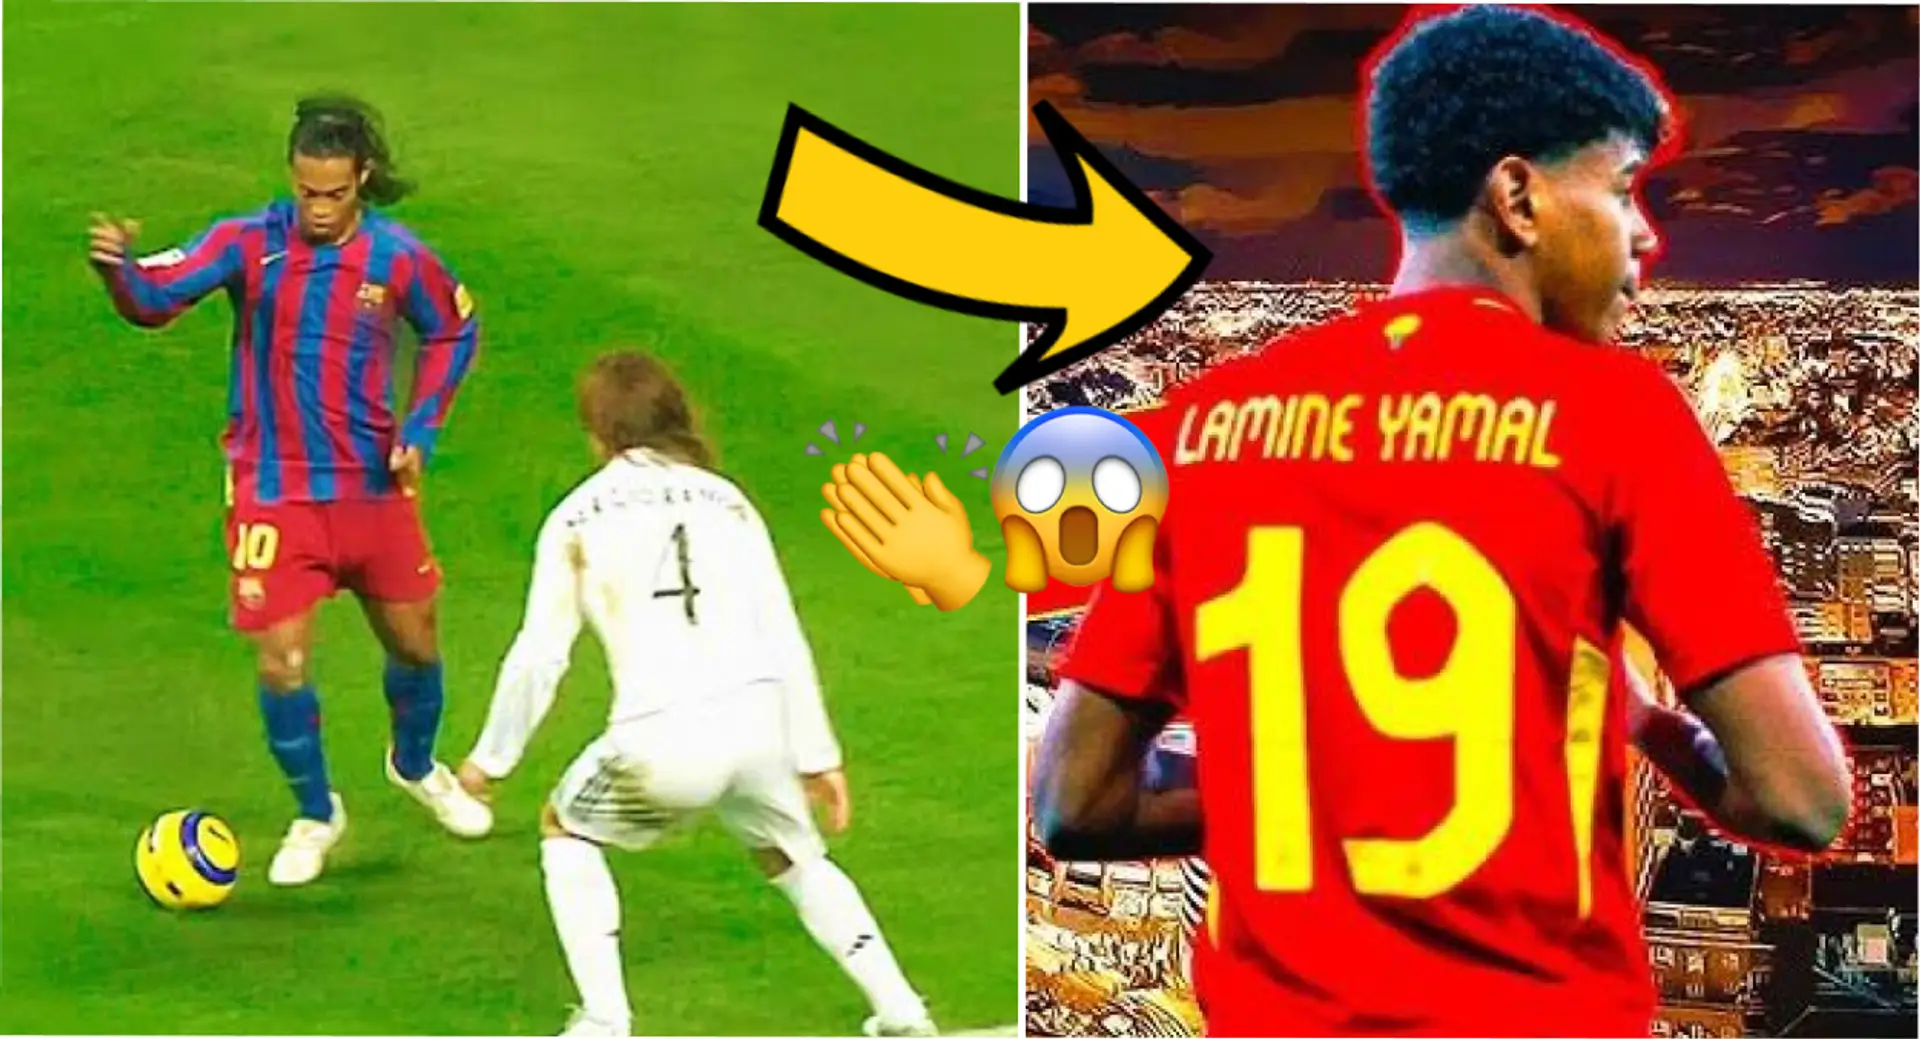 Only FOUR Barcelona players got standing ovation at Bernabeu – Yamal is one of them